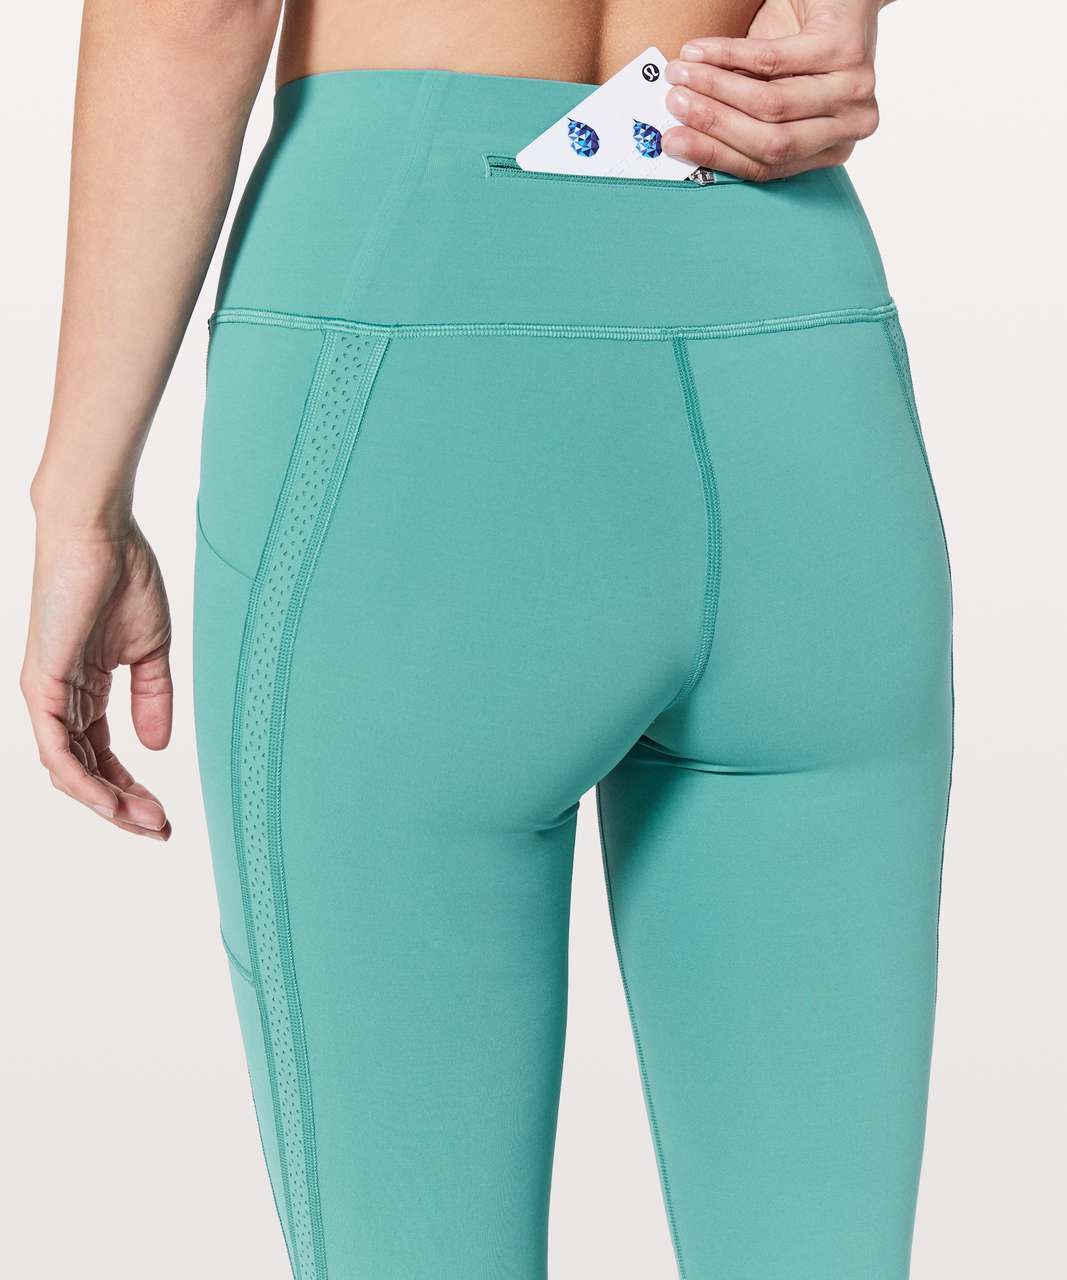 Lululemon Chase The Pace 7/8 Tight *25" - Turquoise Sea